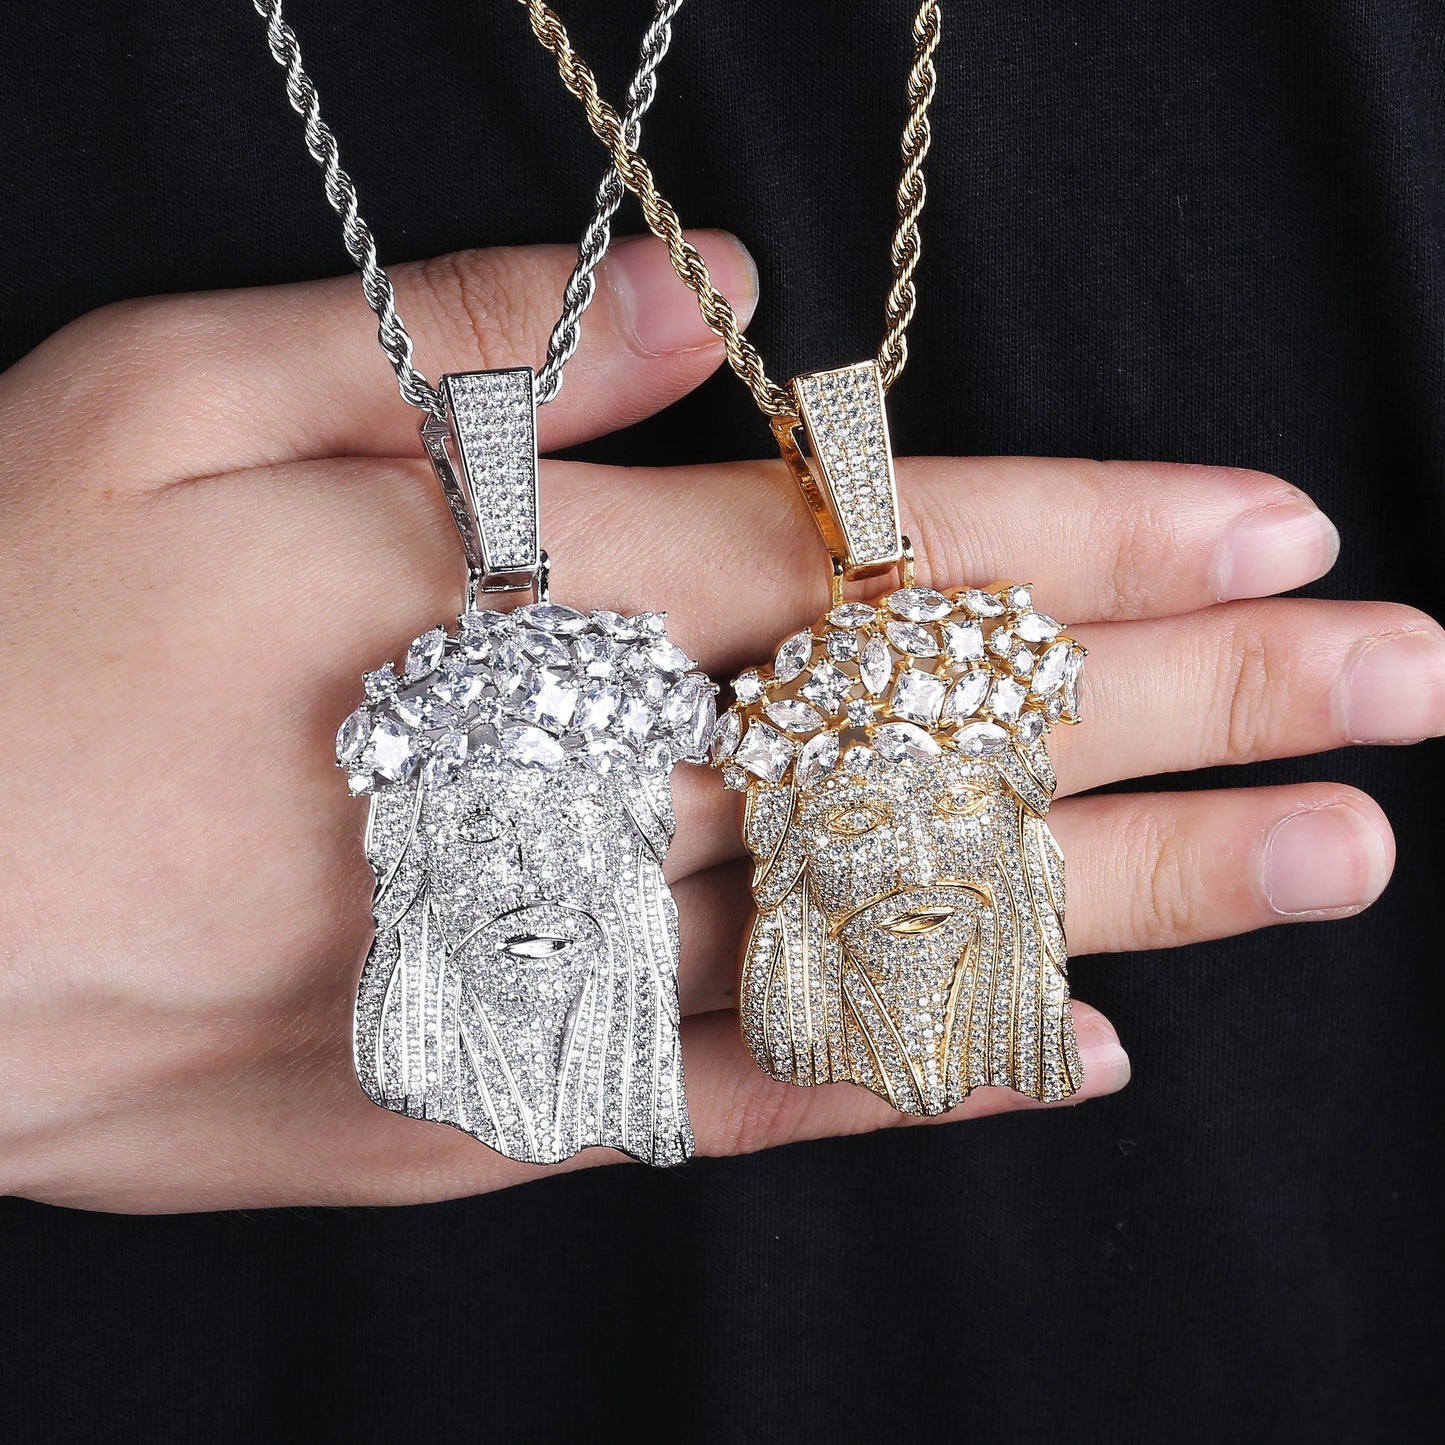 New Big Size Jesus Pendant Necklace With Tennis Chain Mens Iced Out Charm Jewelry Gold Silver Color Chain Hip Hop Jewelry